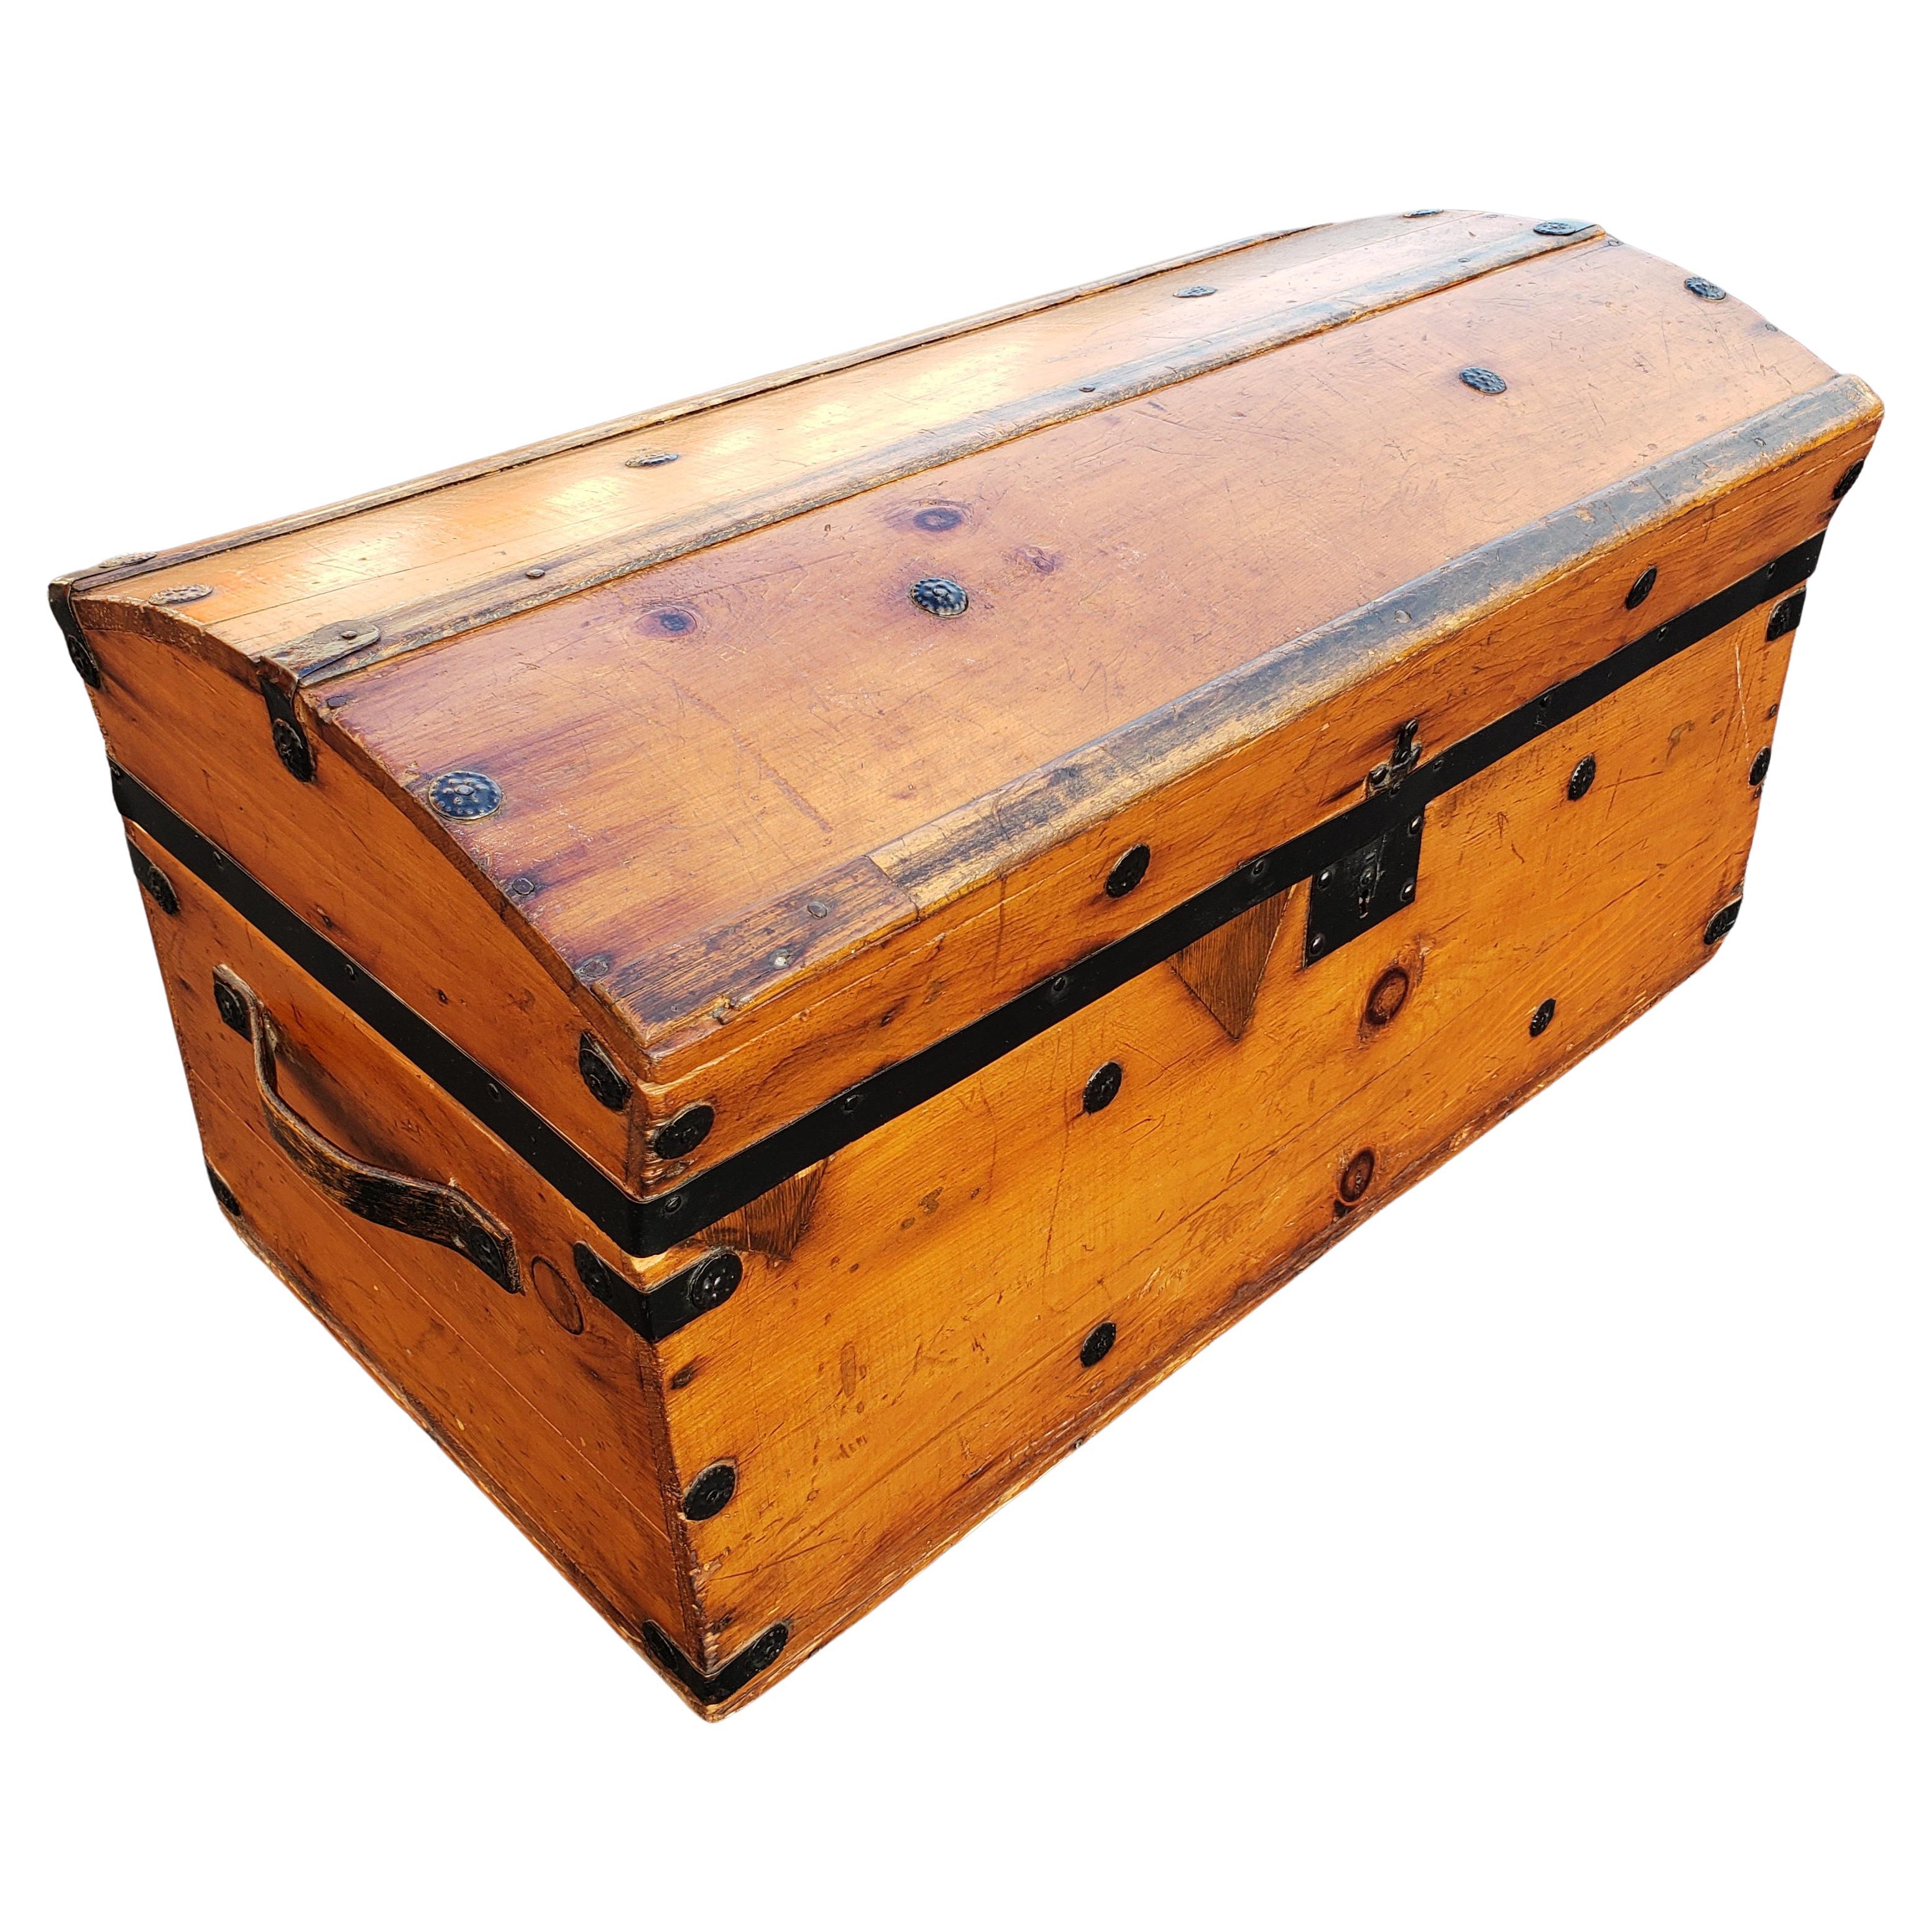 Vintage American pine trunk, Circa 1960s. Lid with secret compartment. Very solid and rare wooden handles
Very solid and compact. 
Lock not functional.
Measurements: 30